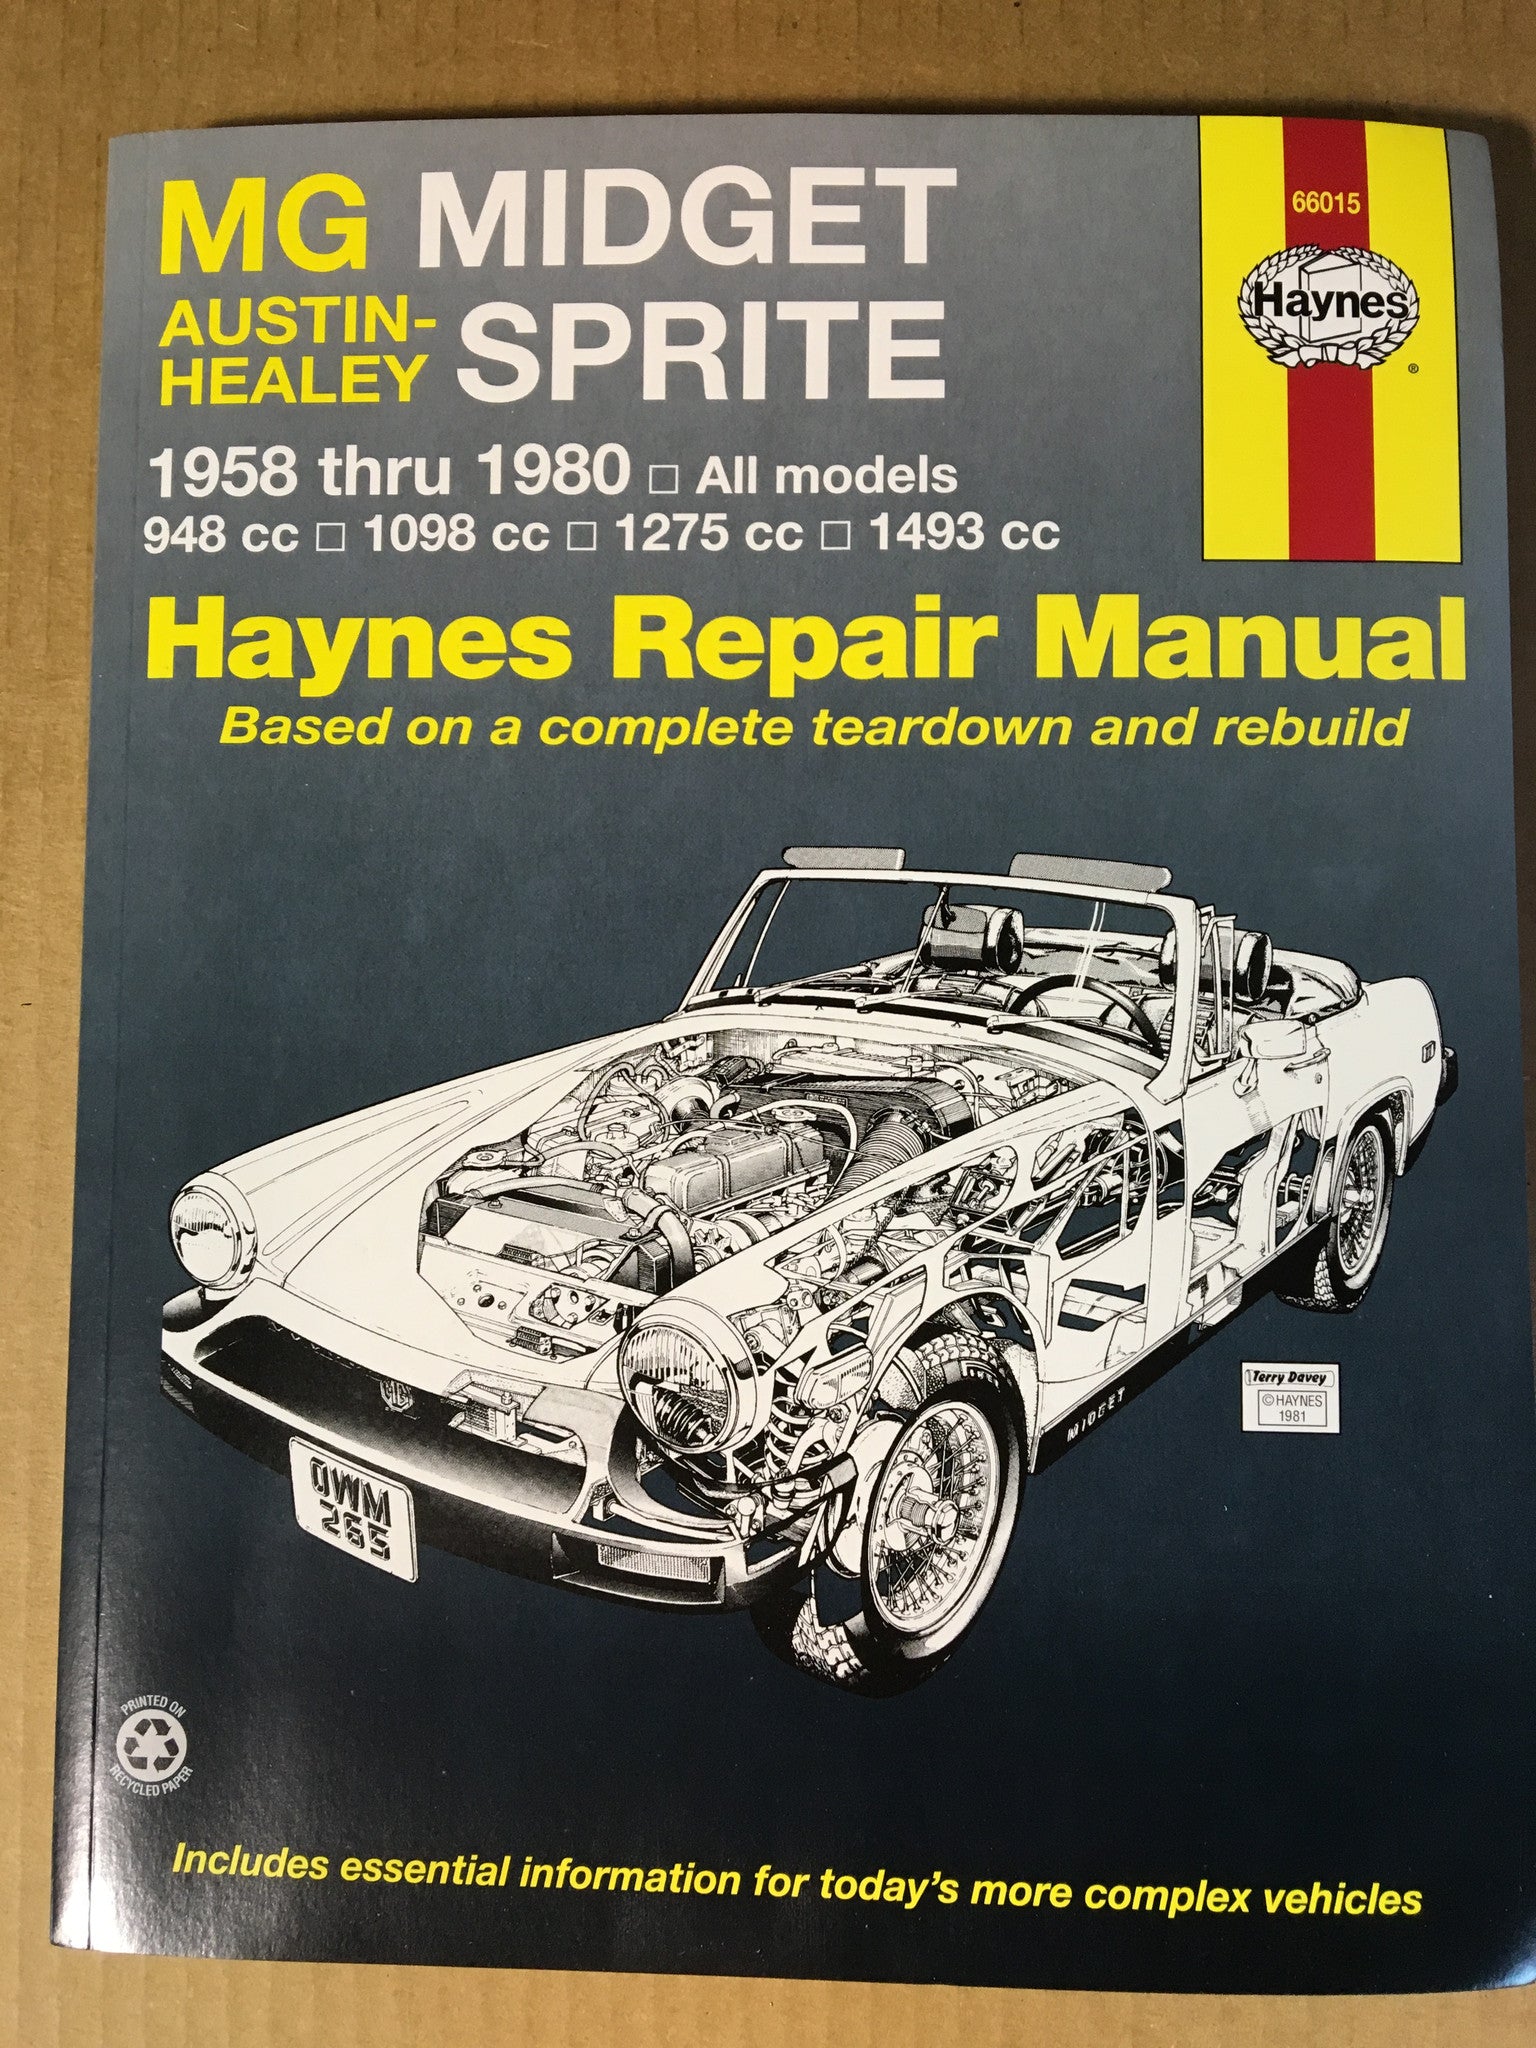 Why Is My Car's Heater Not Working and How to Fix It - Haynes Manuals